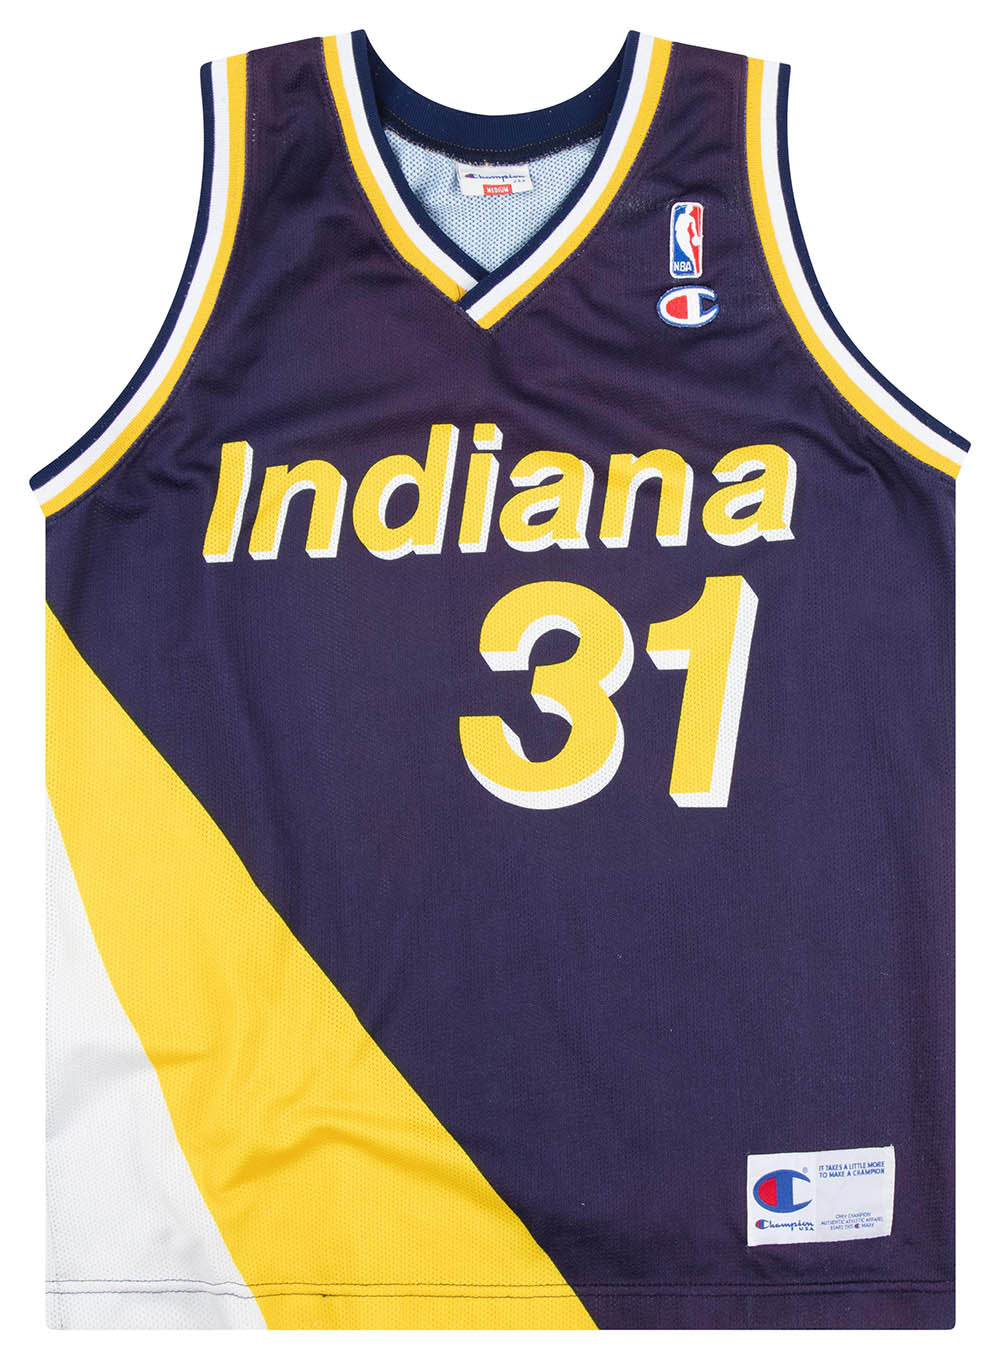 1991-97 INDIANA PACERS MILLER #31 CHAMPION JERSEY (AWAY) L